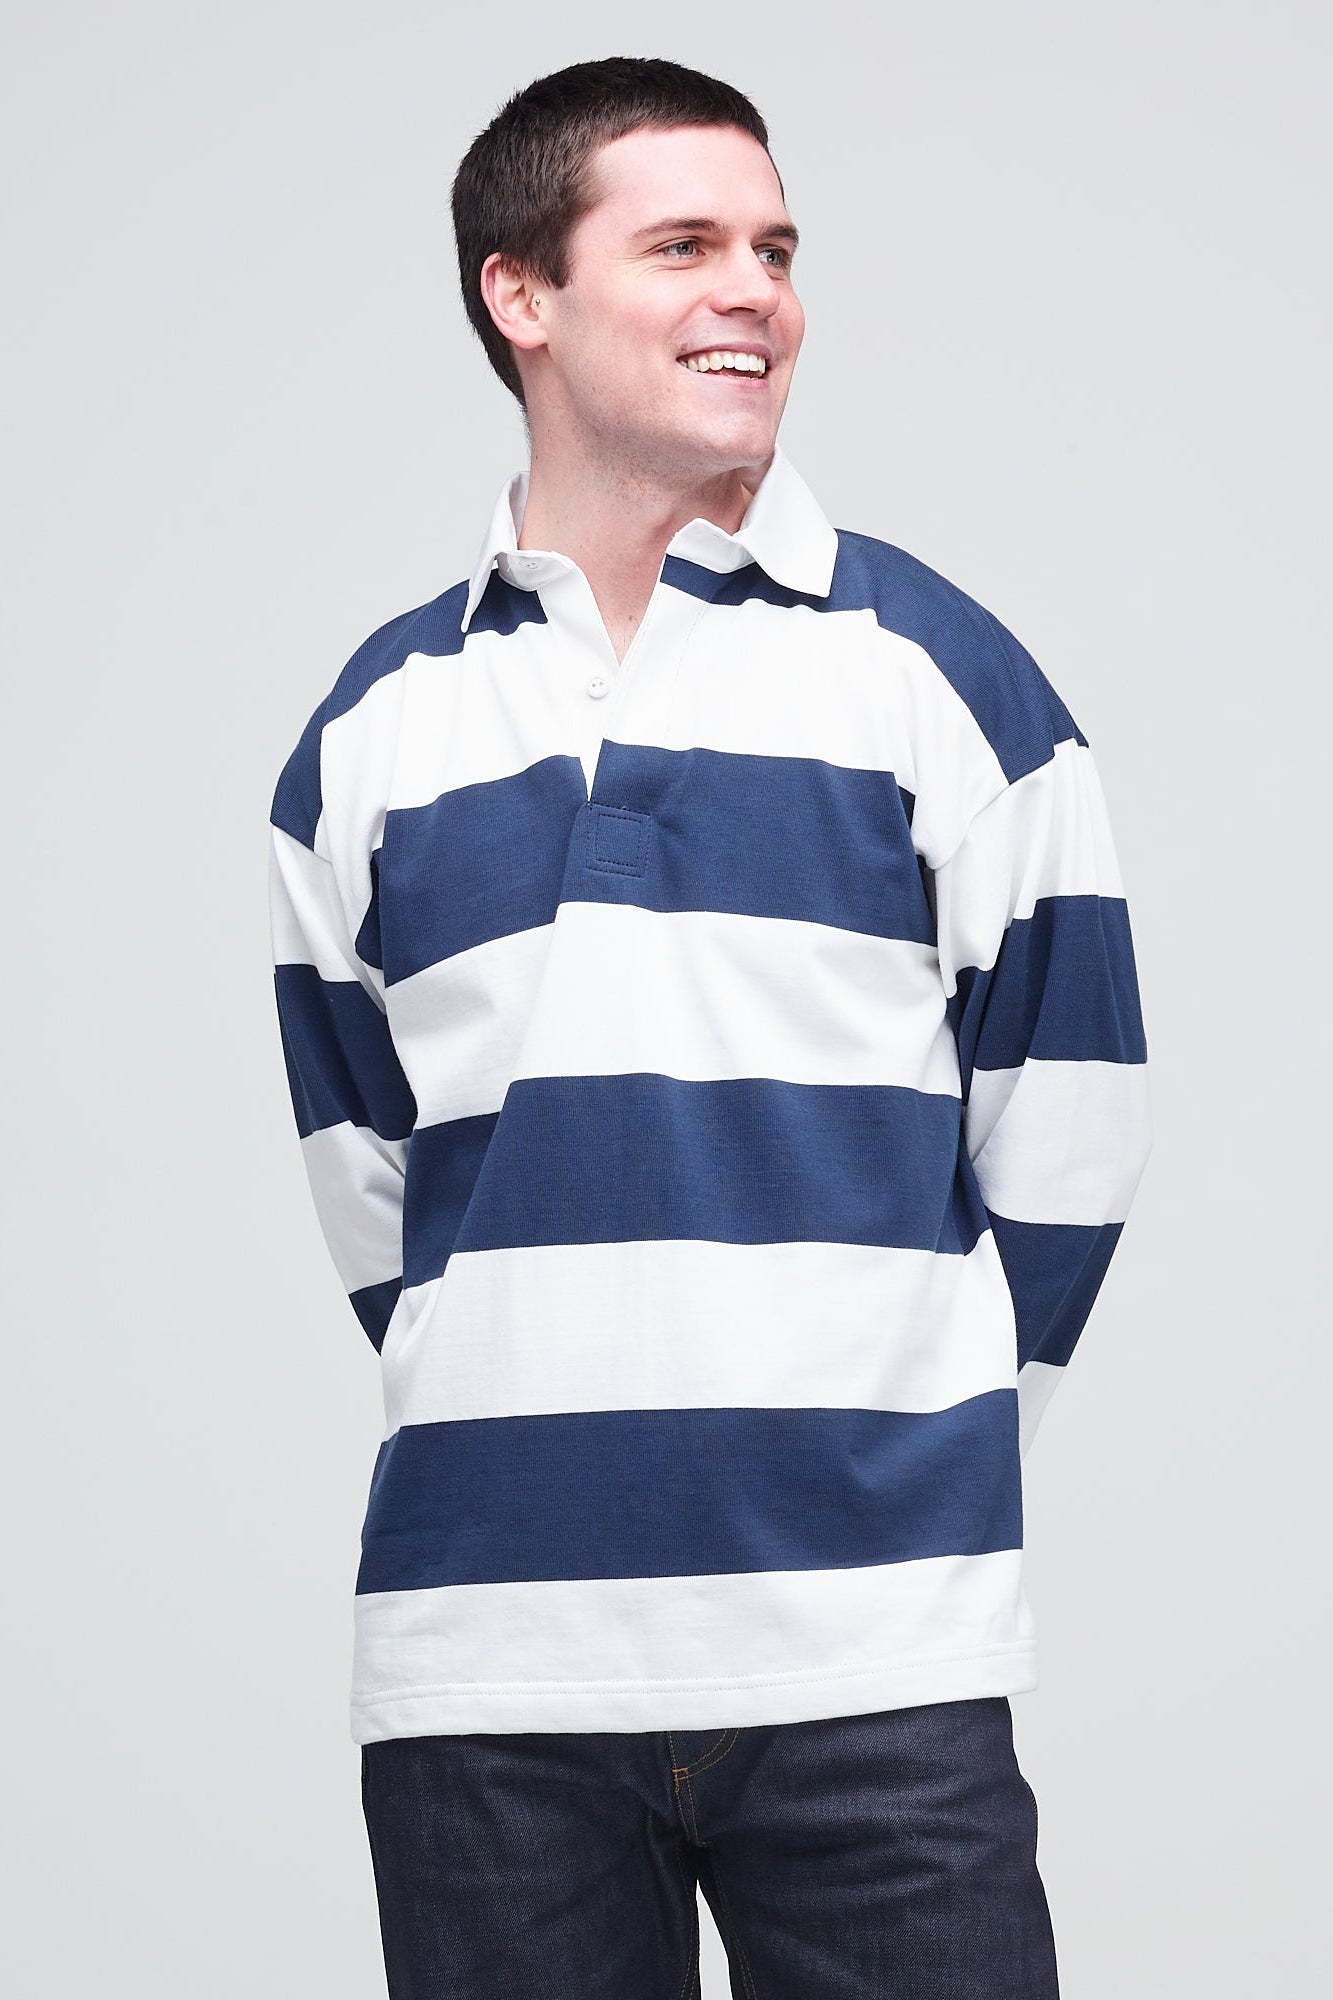      Male_Wide-Striped-Rugby-Shirt_Navey-White_Front2